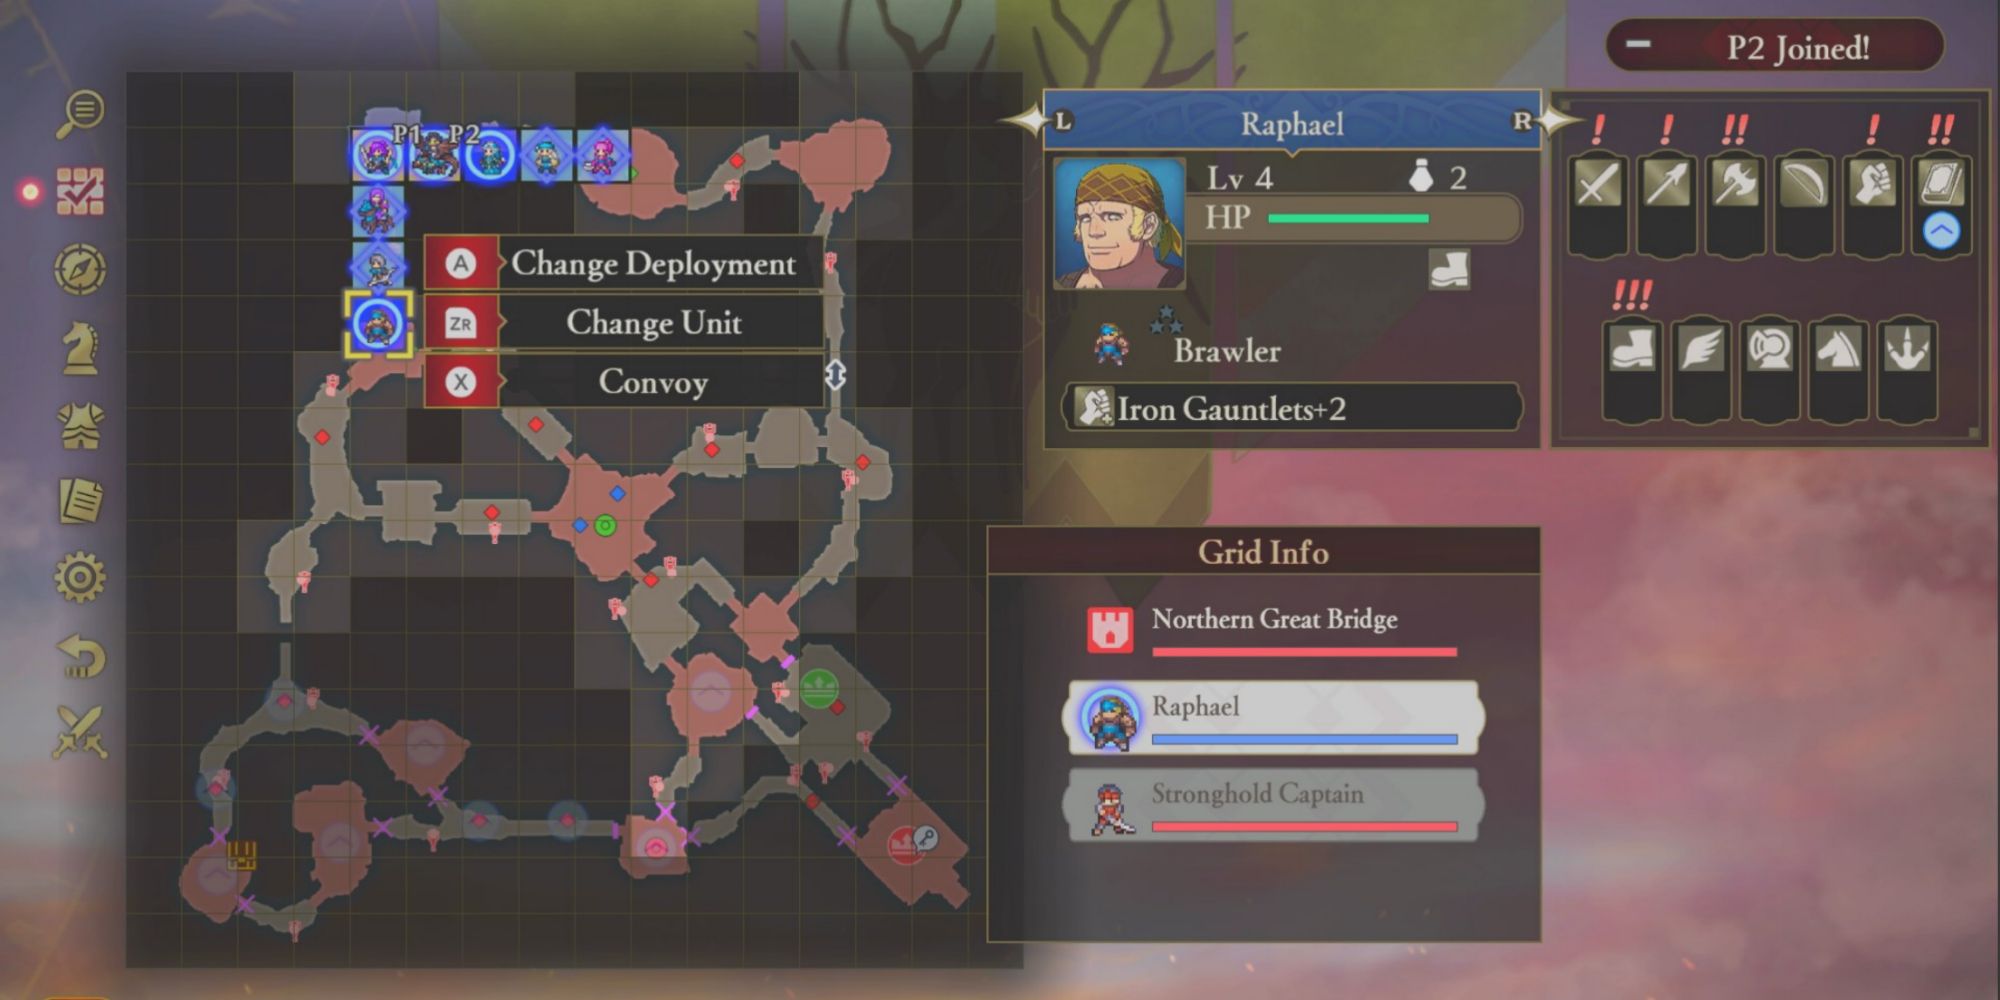 The character Raphael is selected to play on the battlefield map